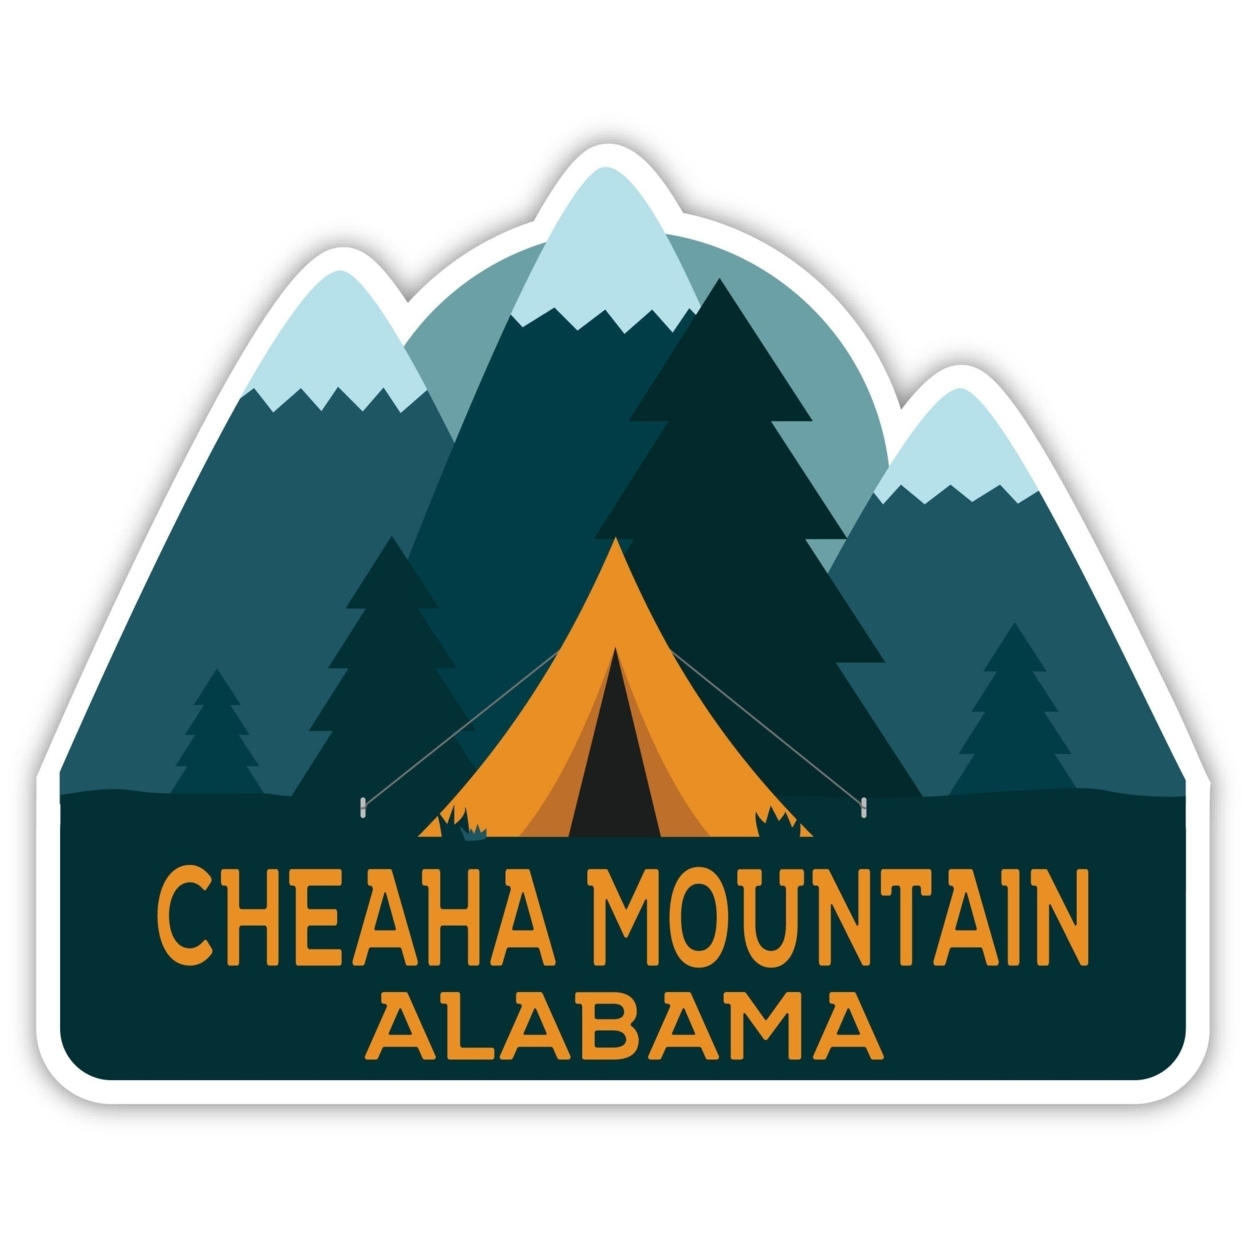 Cheaha Mountain Alabama Souvenir Decorative Stickers (Choose Theme And Size) - Single Unit, 12-Inch, Great Outdoors